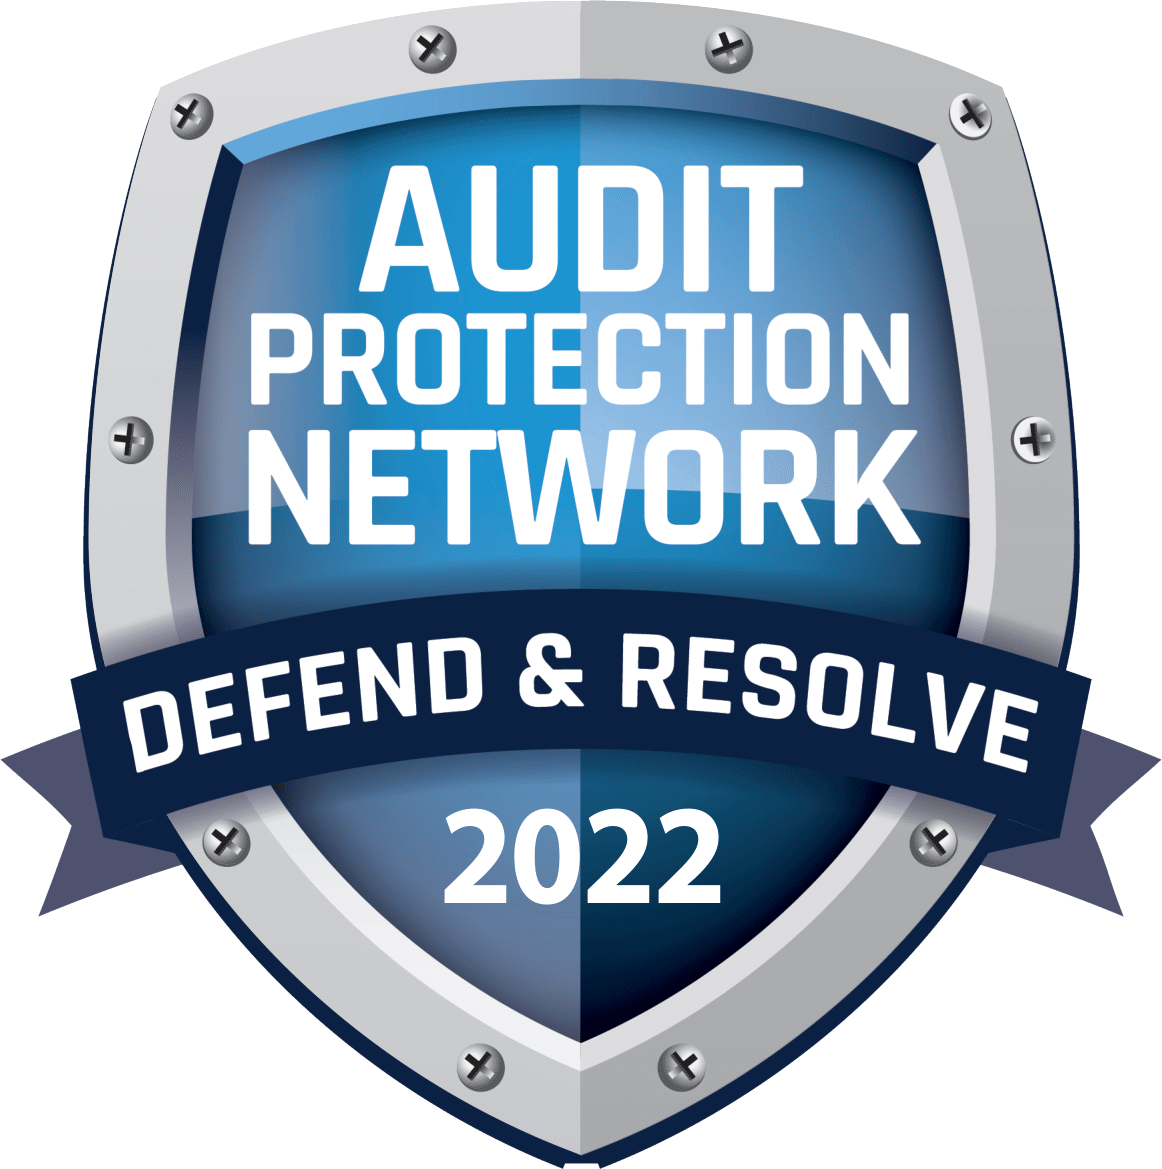 Tax-Relief-Audit-Protection-Network-Defend-And-Resolve-2022-Certification